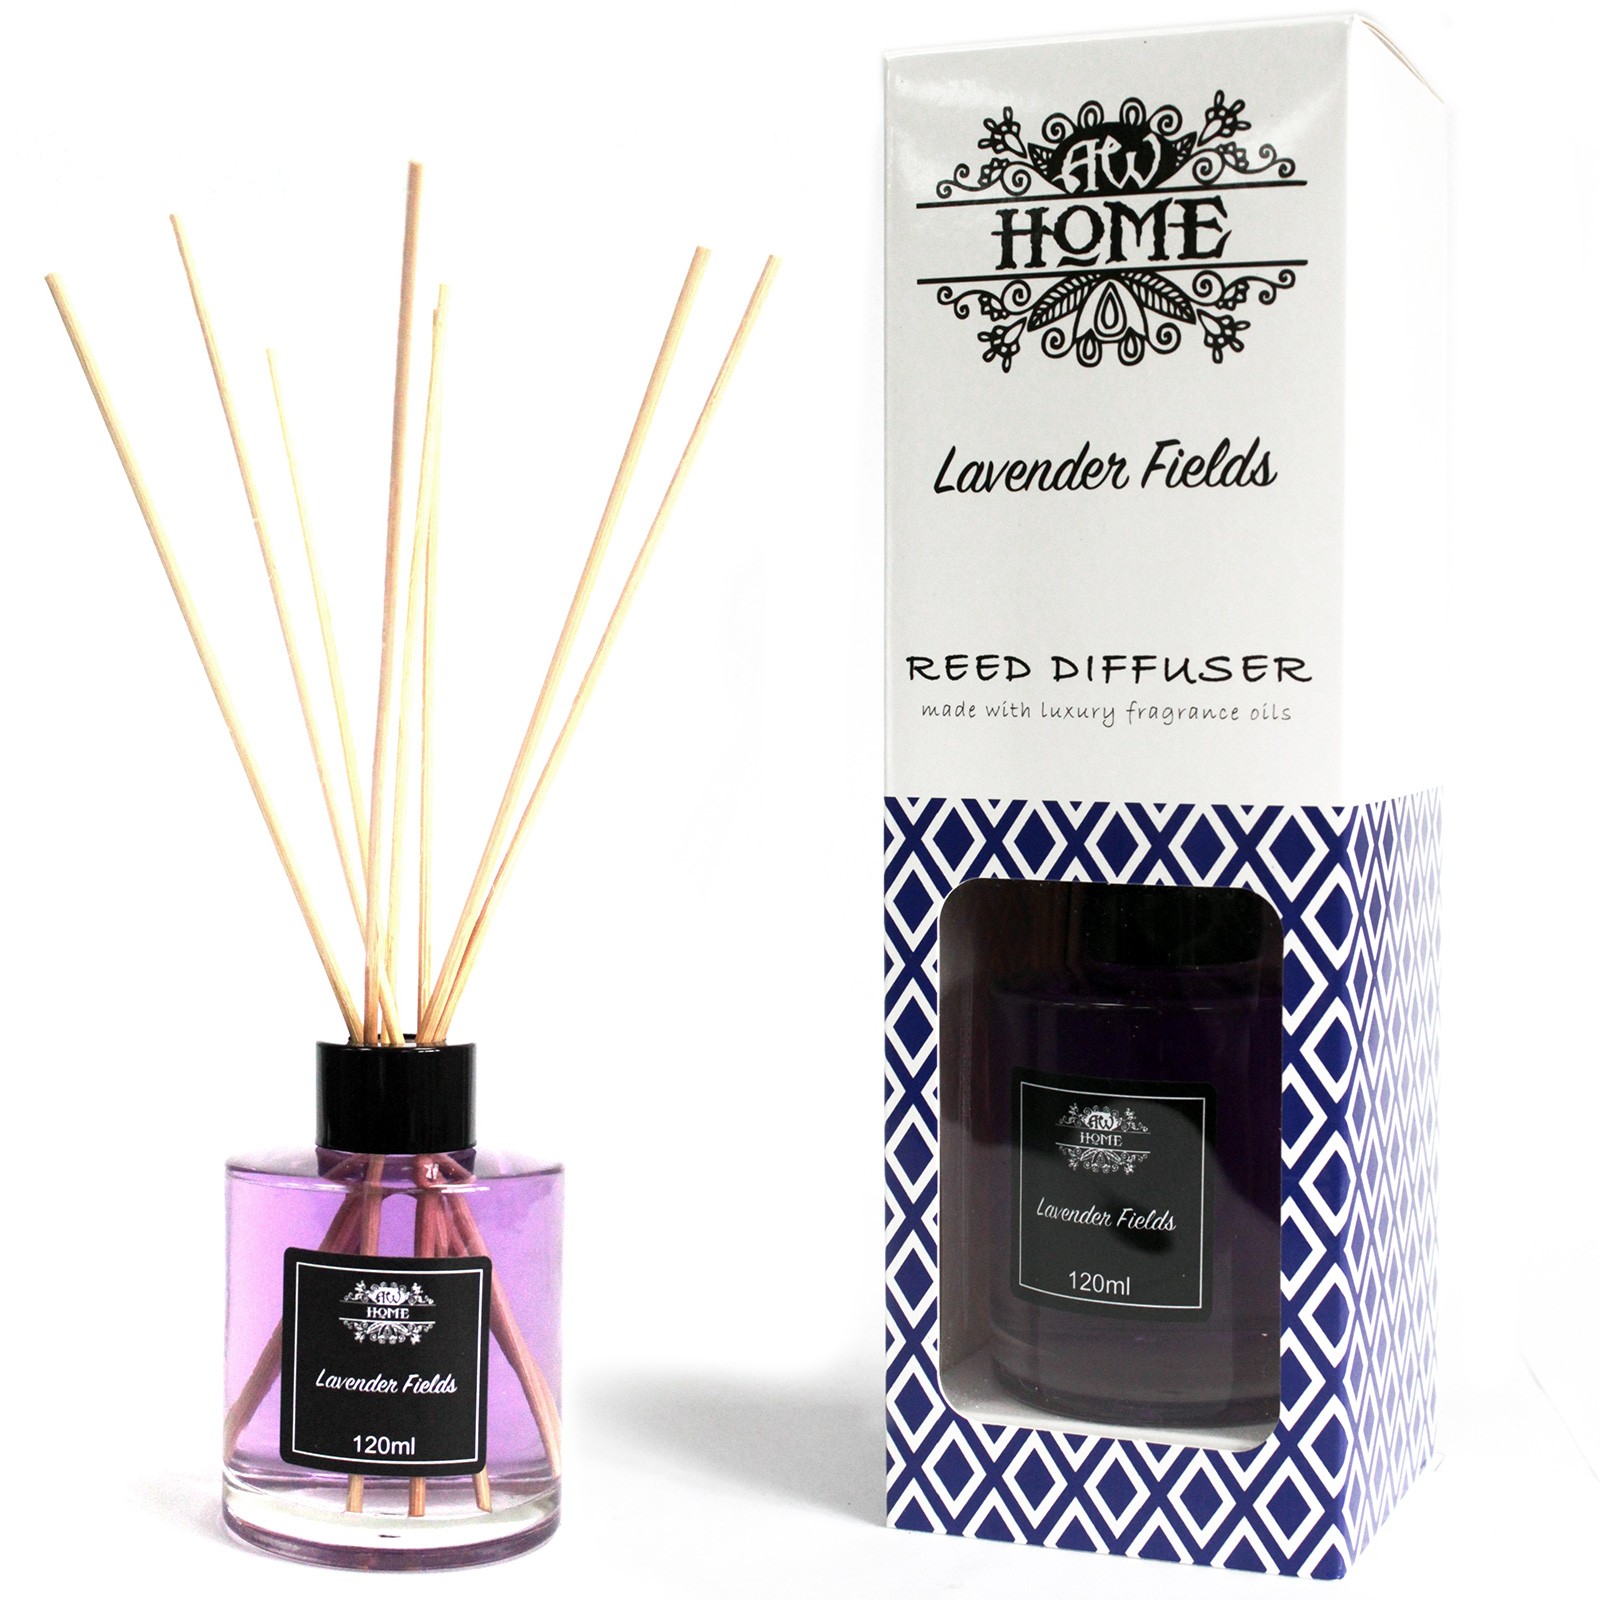 Lavender Fields - Home Fragrance Reed Diffuser - 120ml With Reeds